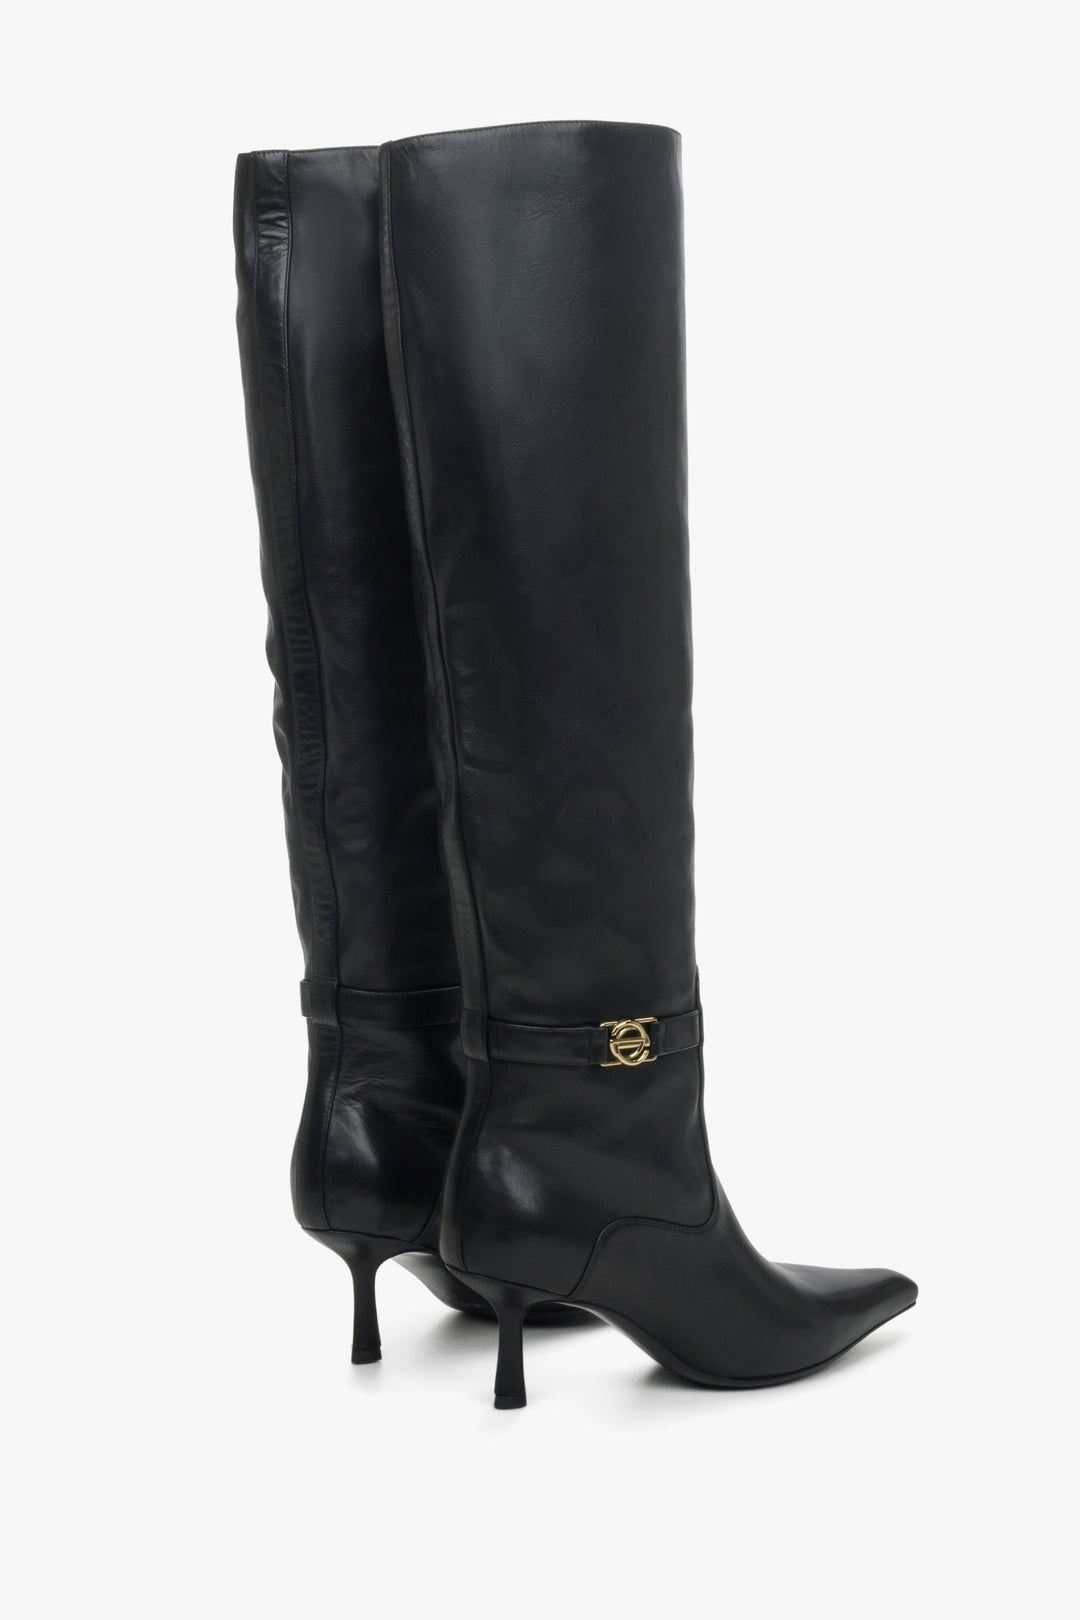 Women's black boots made of genuine leather with a low heel by Estro - close-up on the back of the boot.